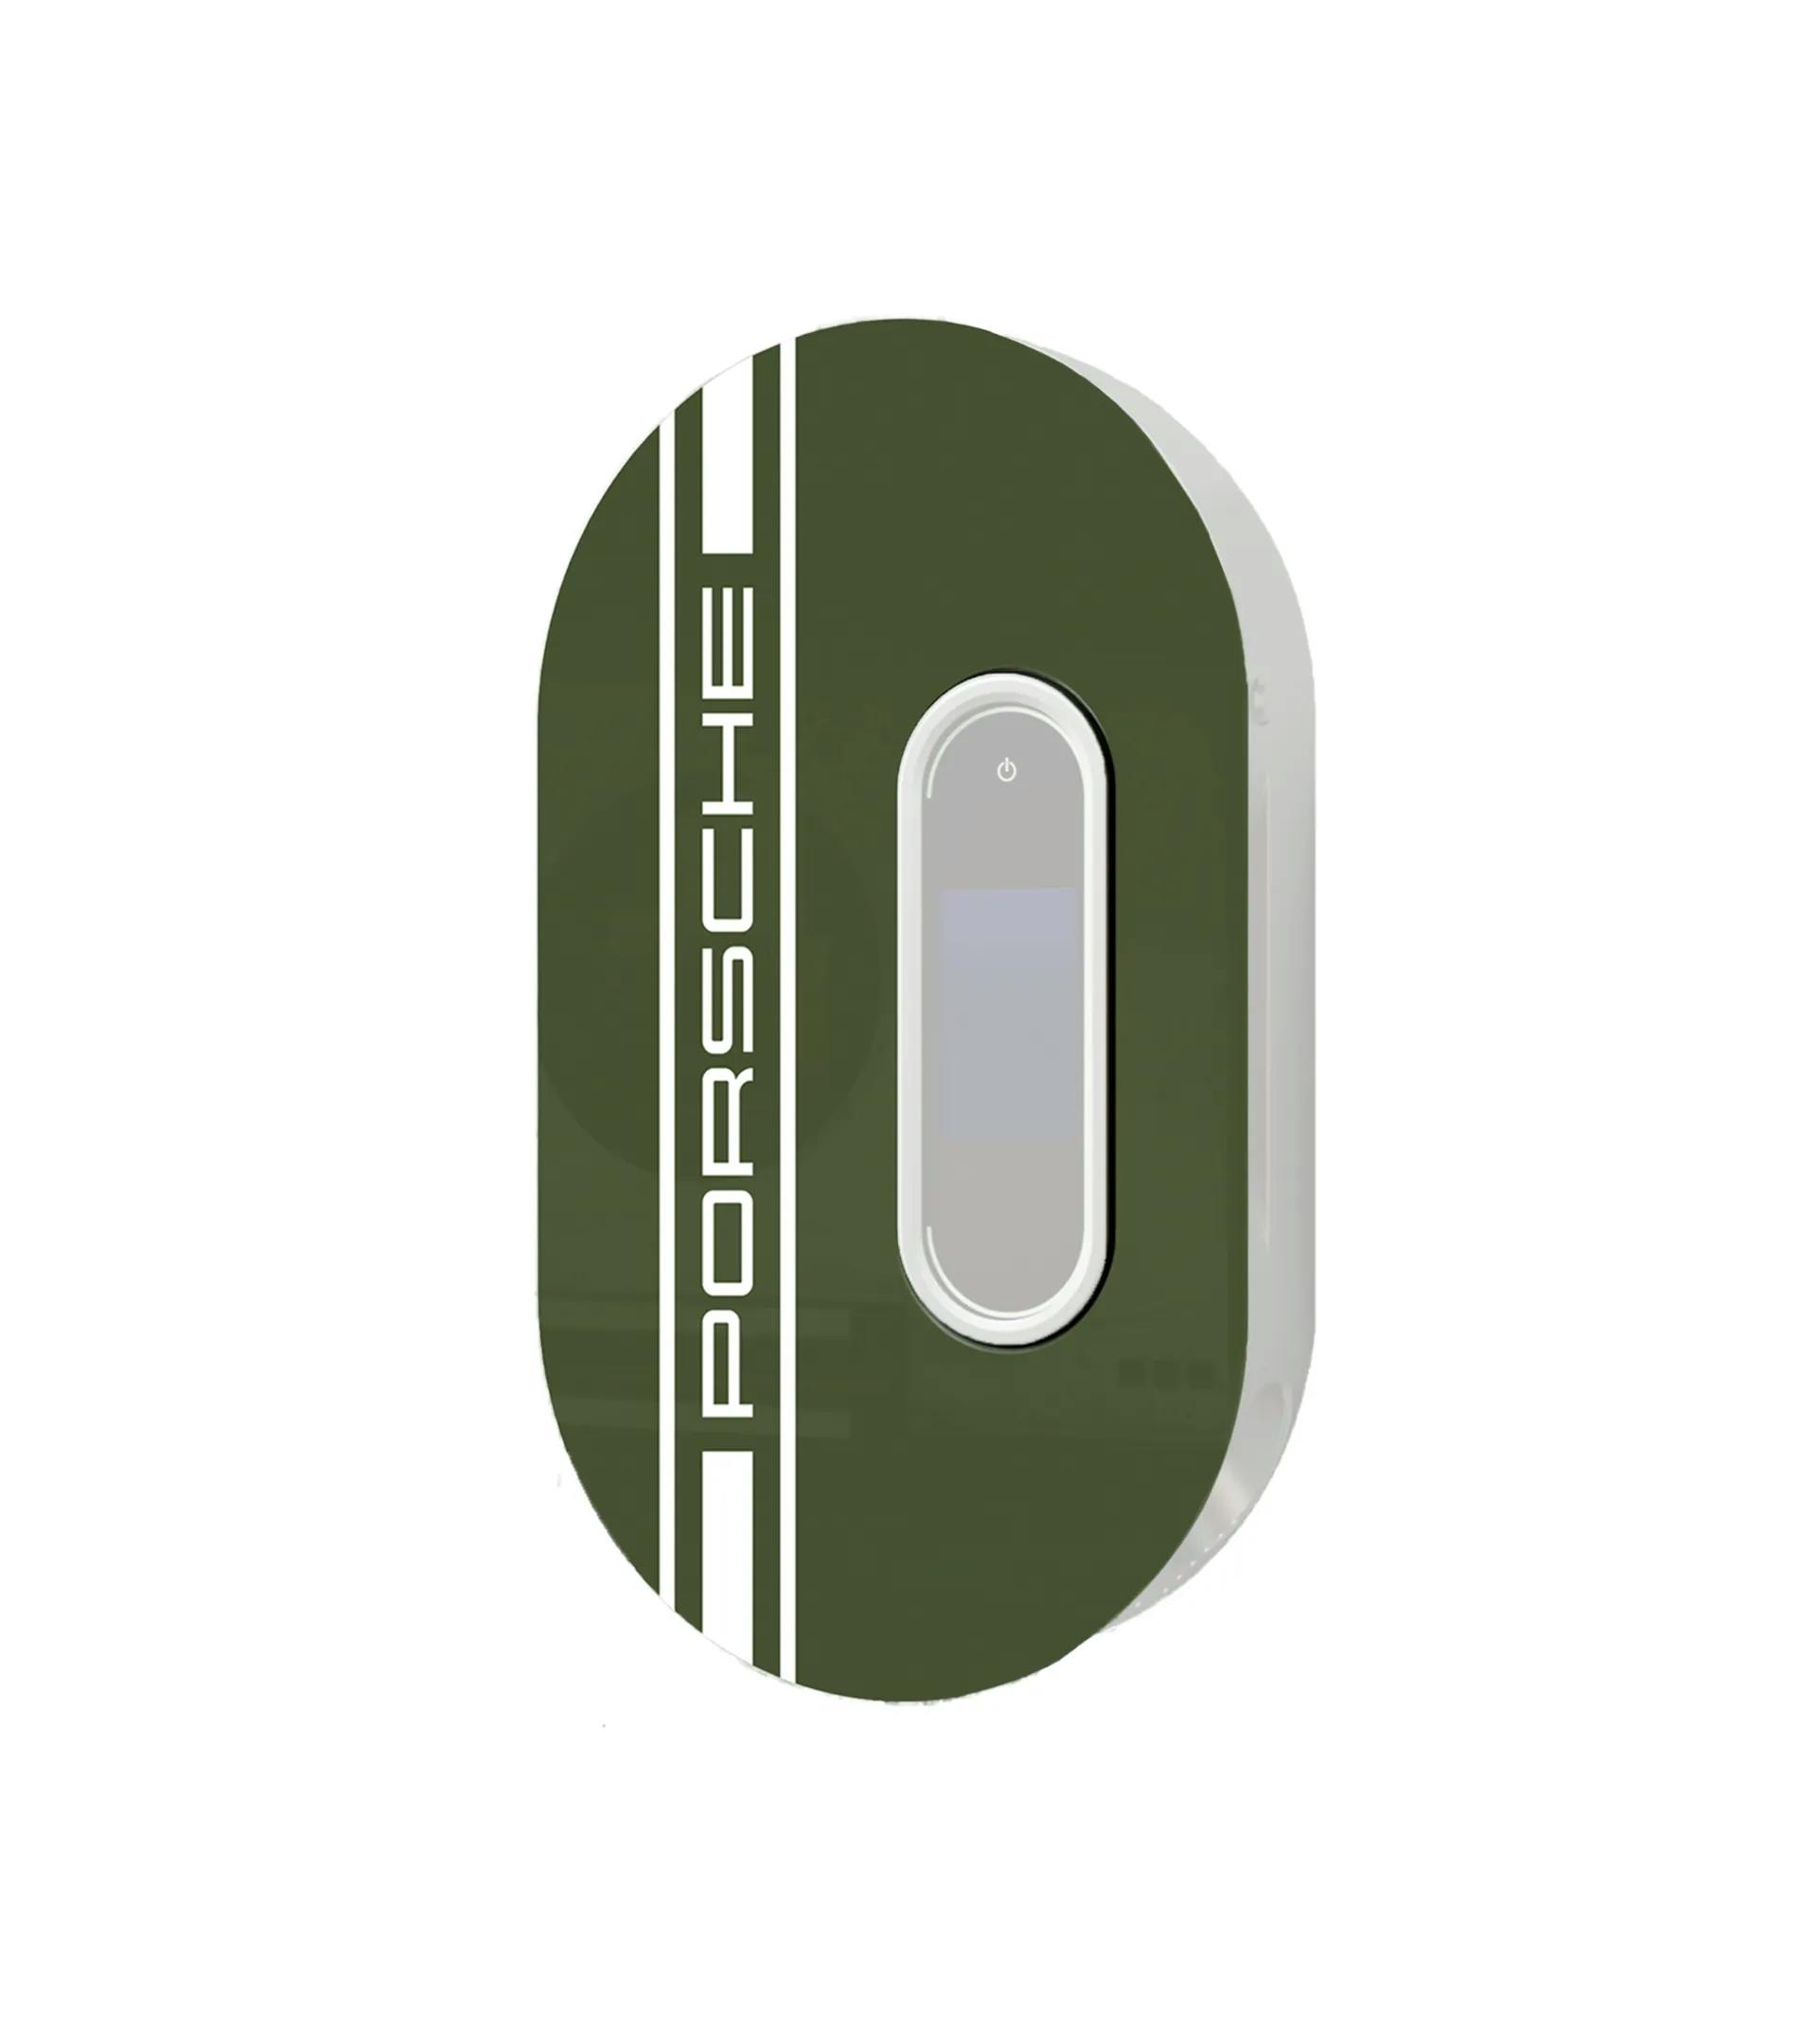 Design cover for open Charging Dock 1